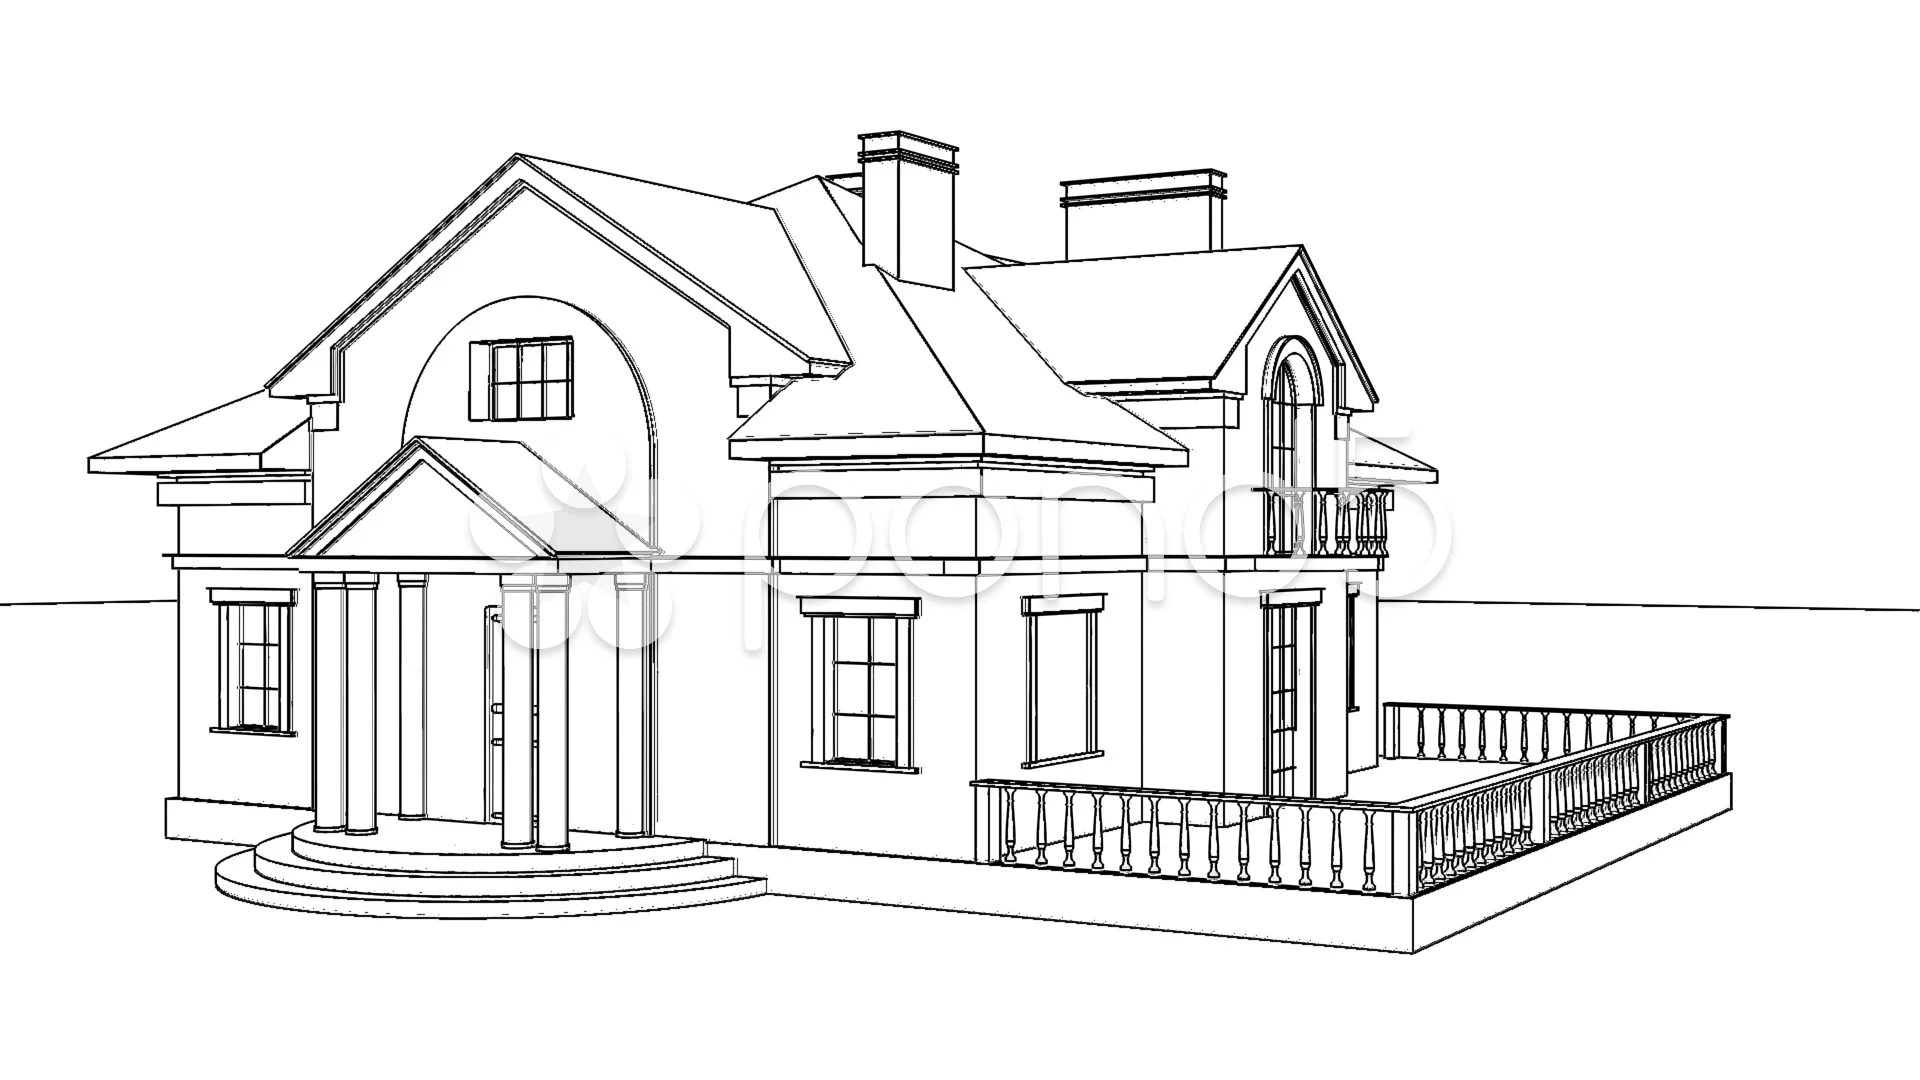 3d house design cad drawing is given in this cad file. Download this 3d cad  drawing now. - Cadbull